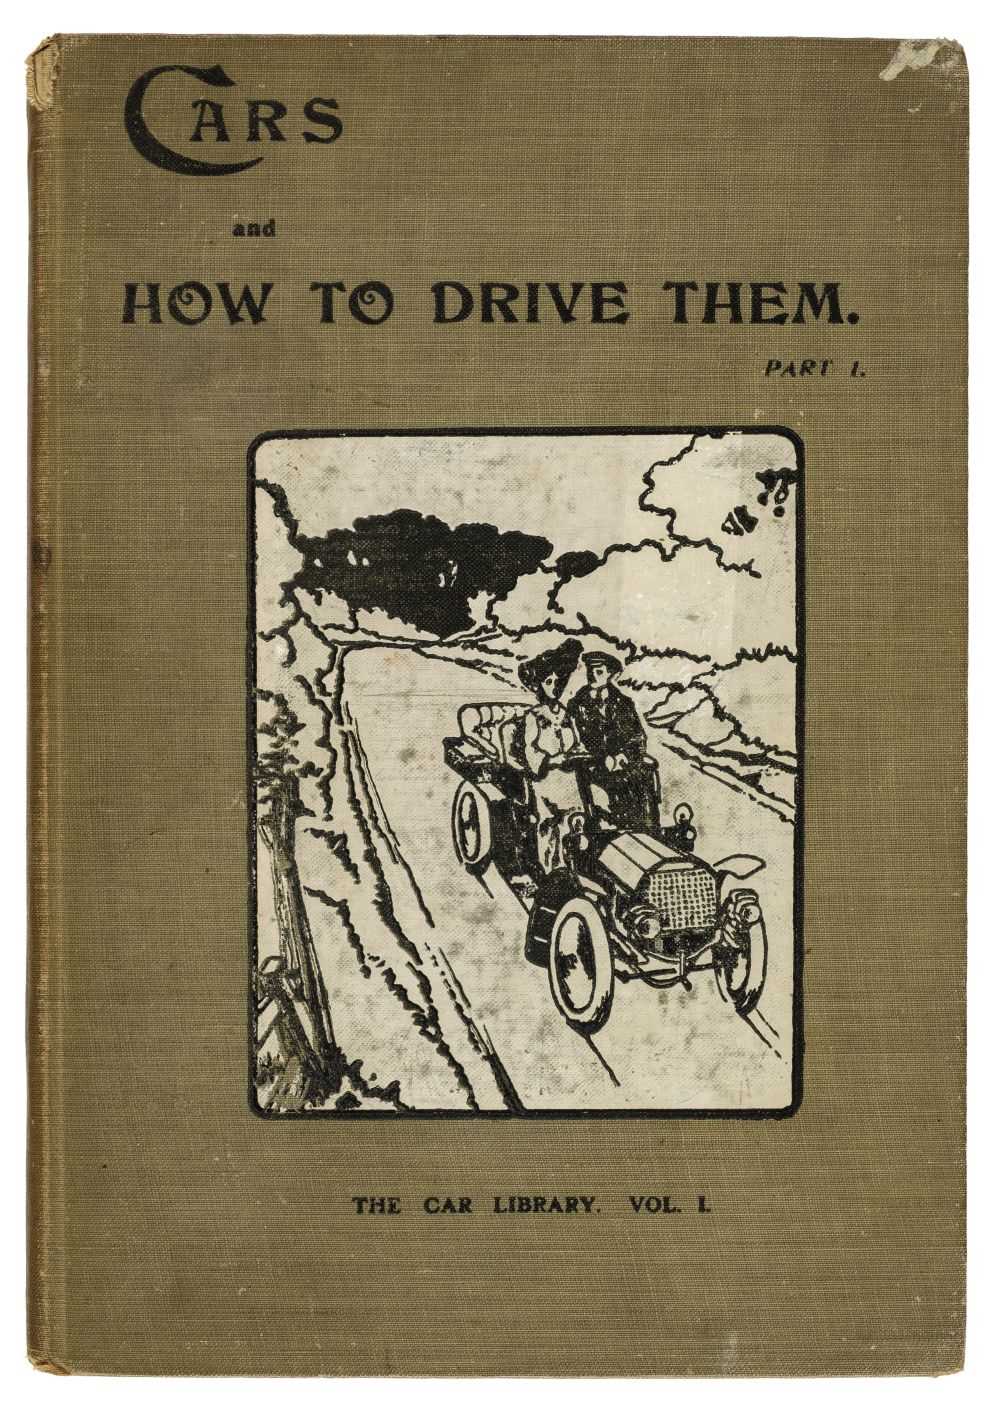 Lot 56 - Montagu (John Scott). The Car Library, Cars and how to Drive them, 1903, & others